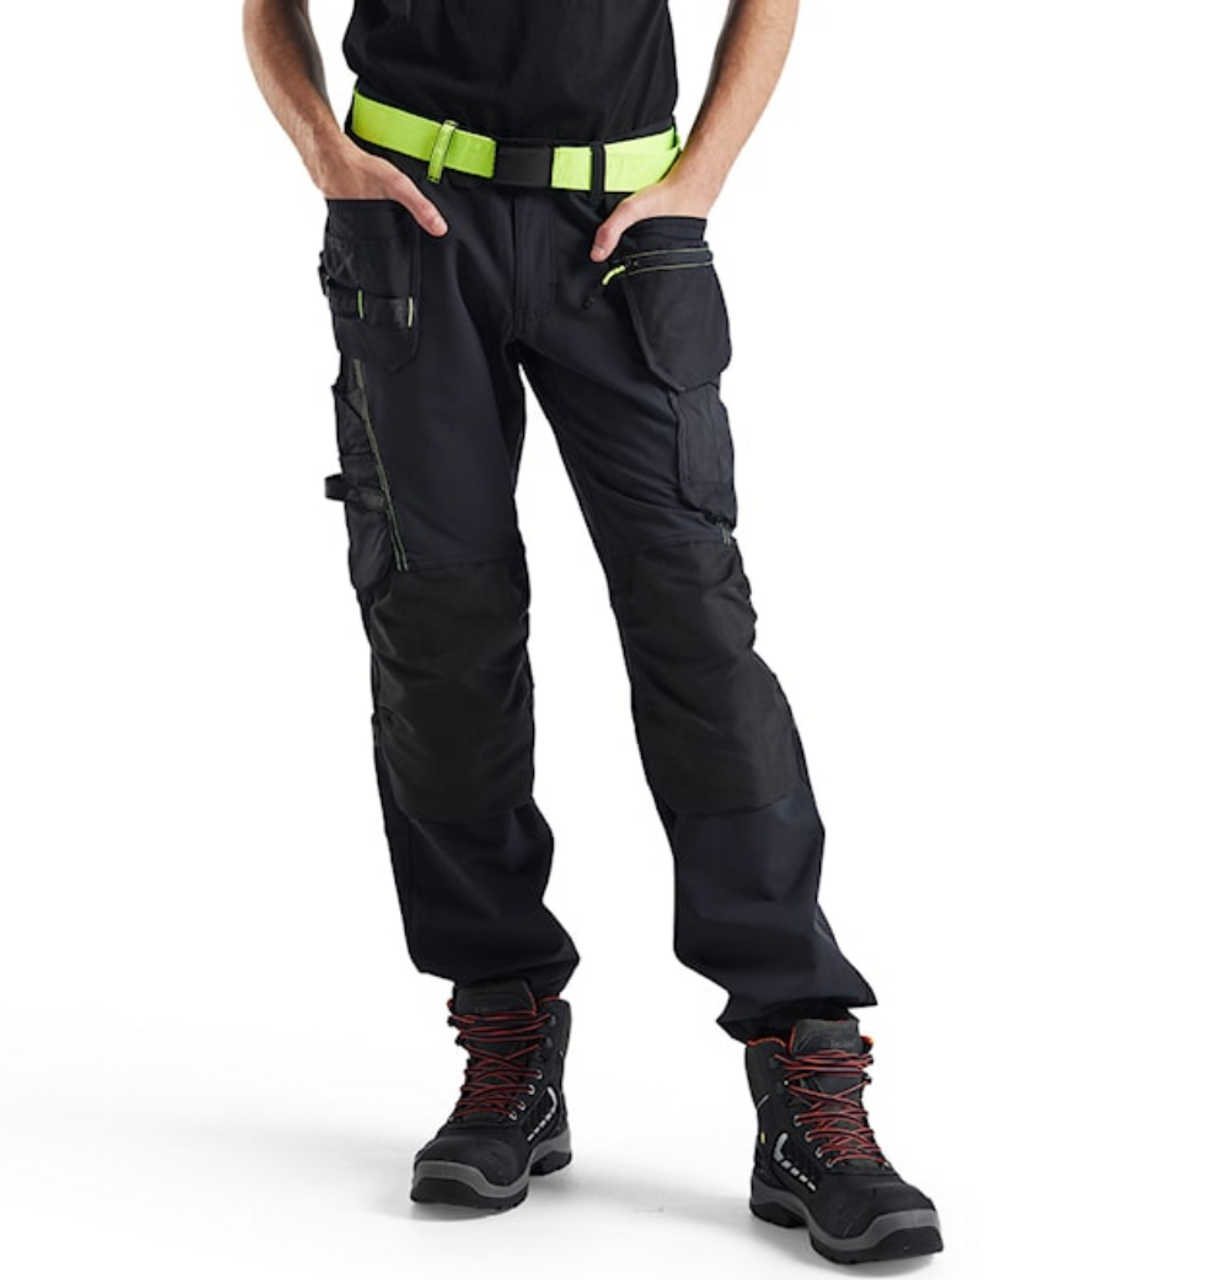 BLAKLADER 1522 Black Trousers with Holster Pockets for the Workers and Electricians in Automotive